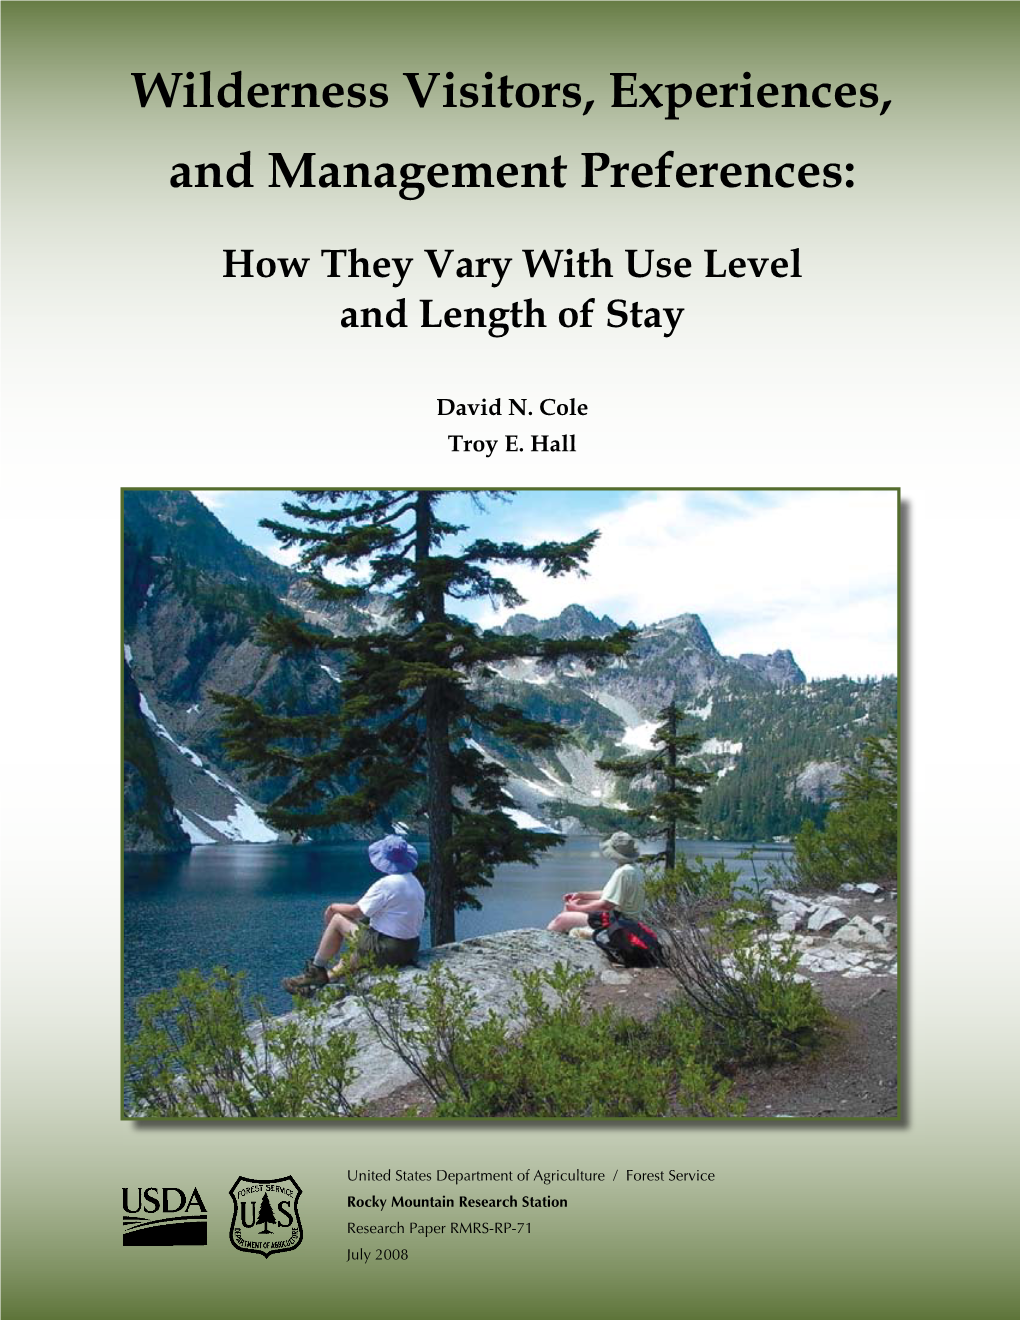 Wilderness Visitors, Experiences, and Management Preferences